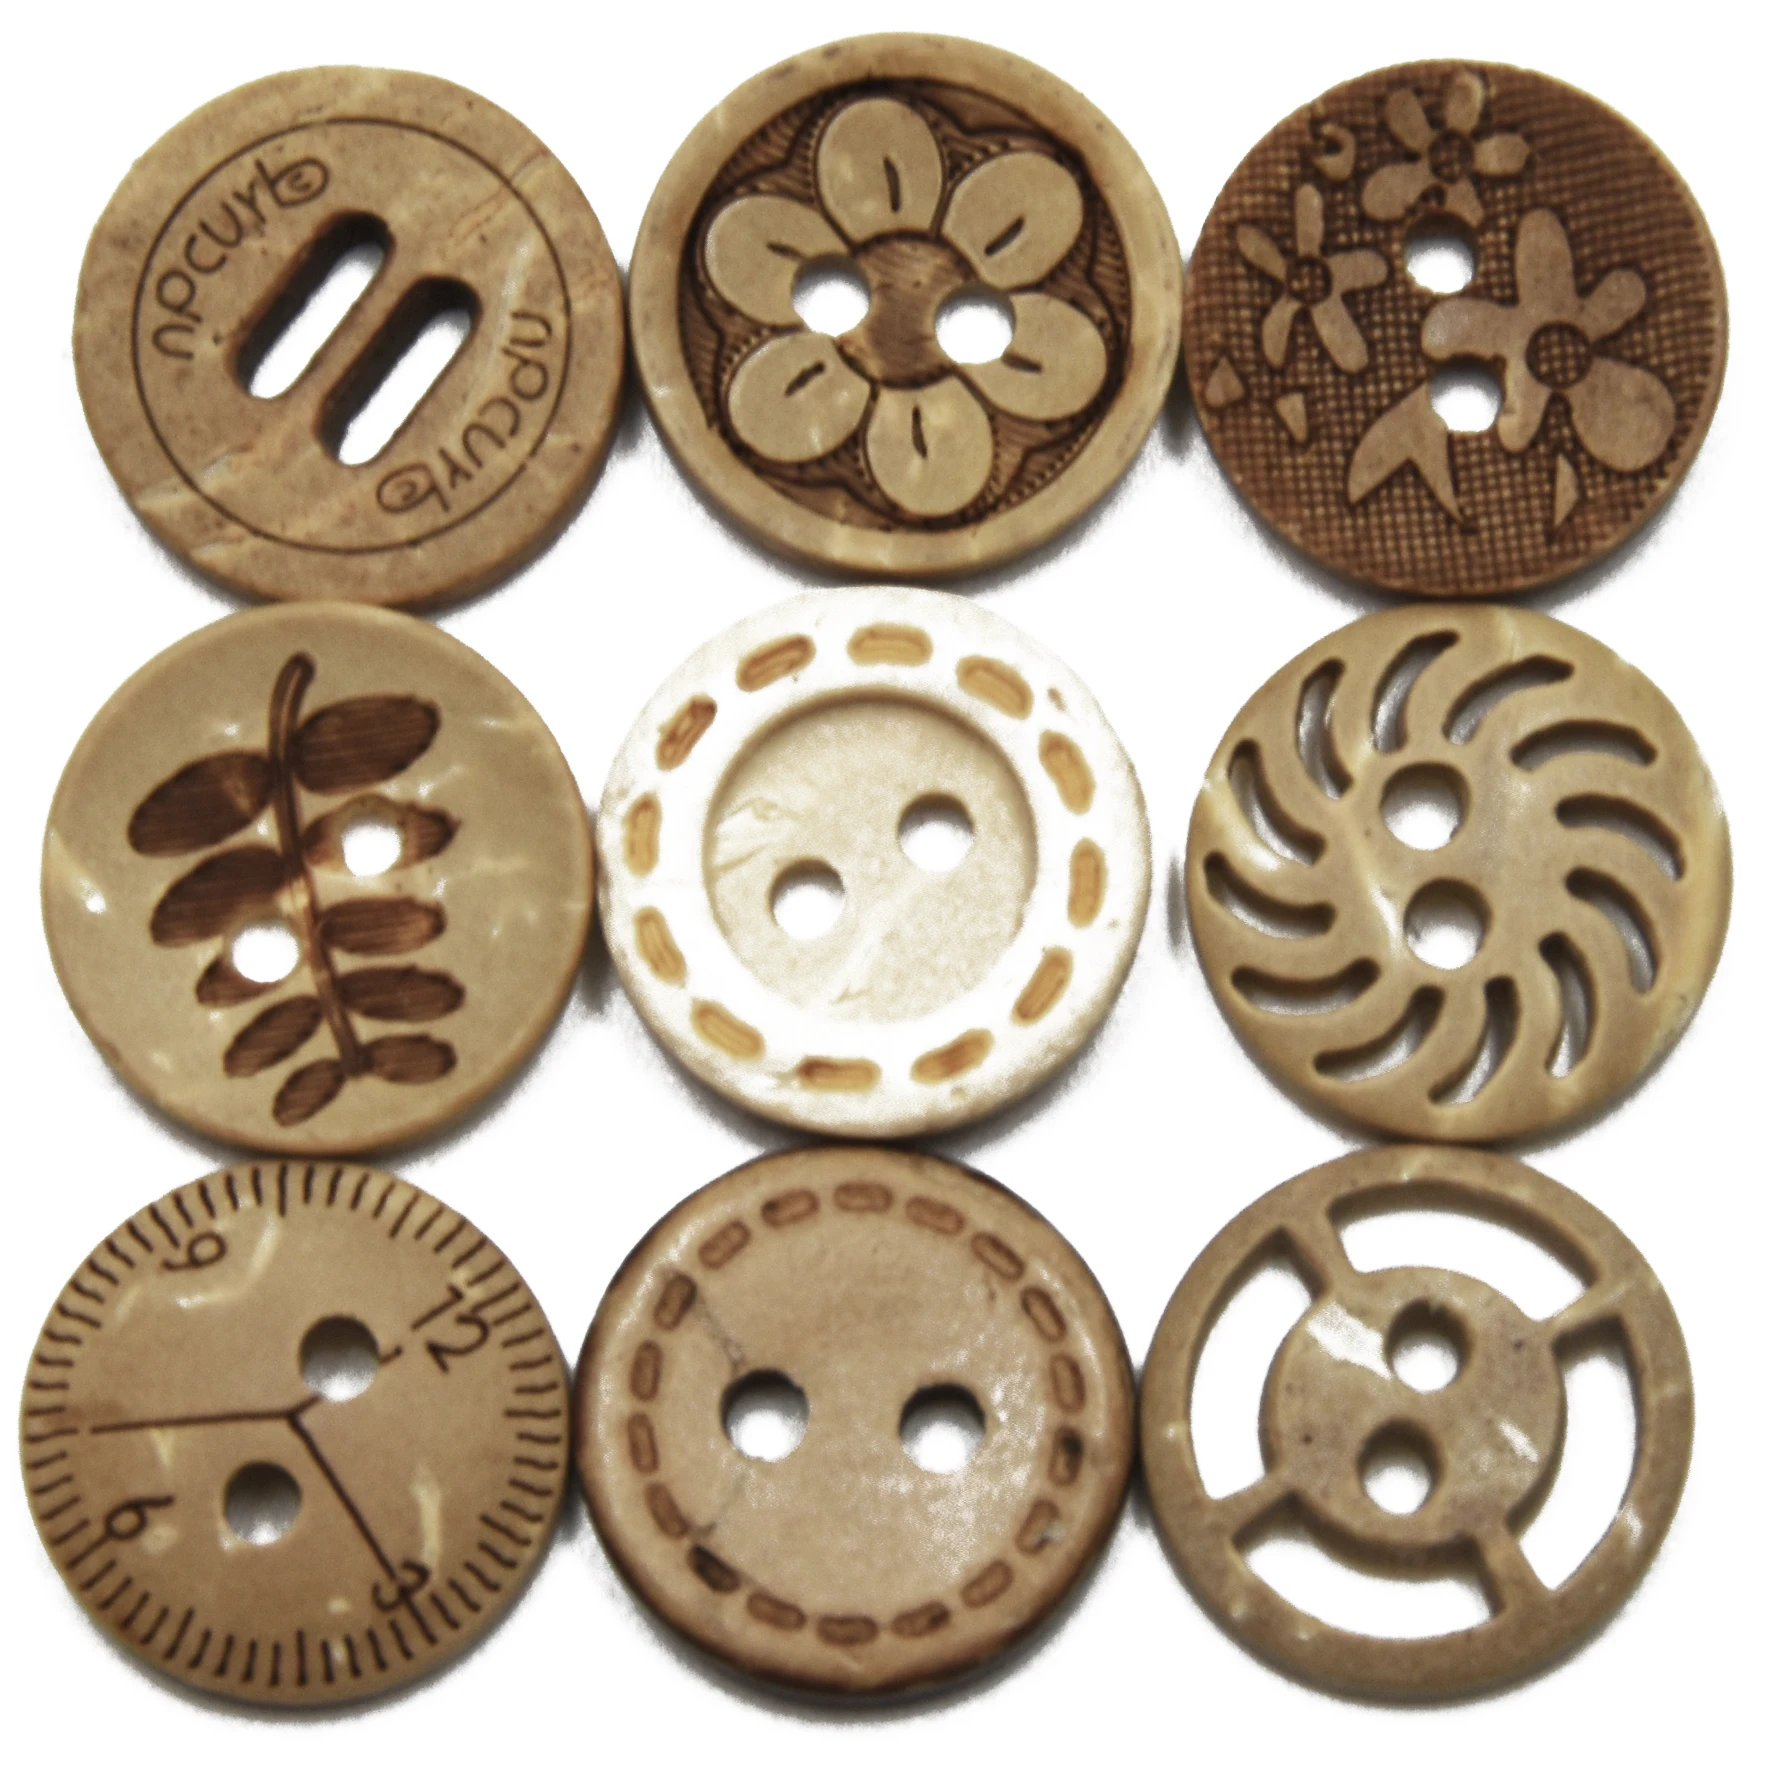 30PCs/Lot Size 13mm Natural Color Laser Round Coconut Shell Buttons Crafts Sewing Scrapbooking Wood For Kids Clothes Handmade